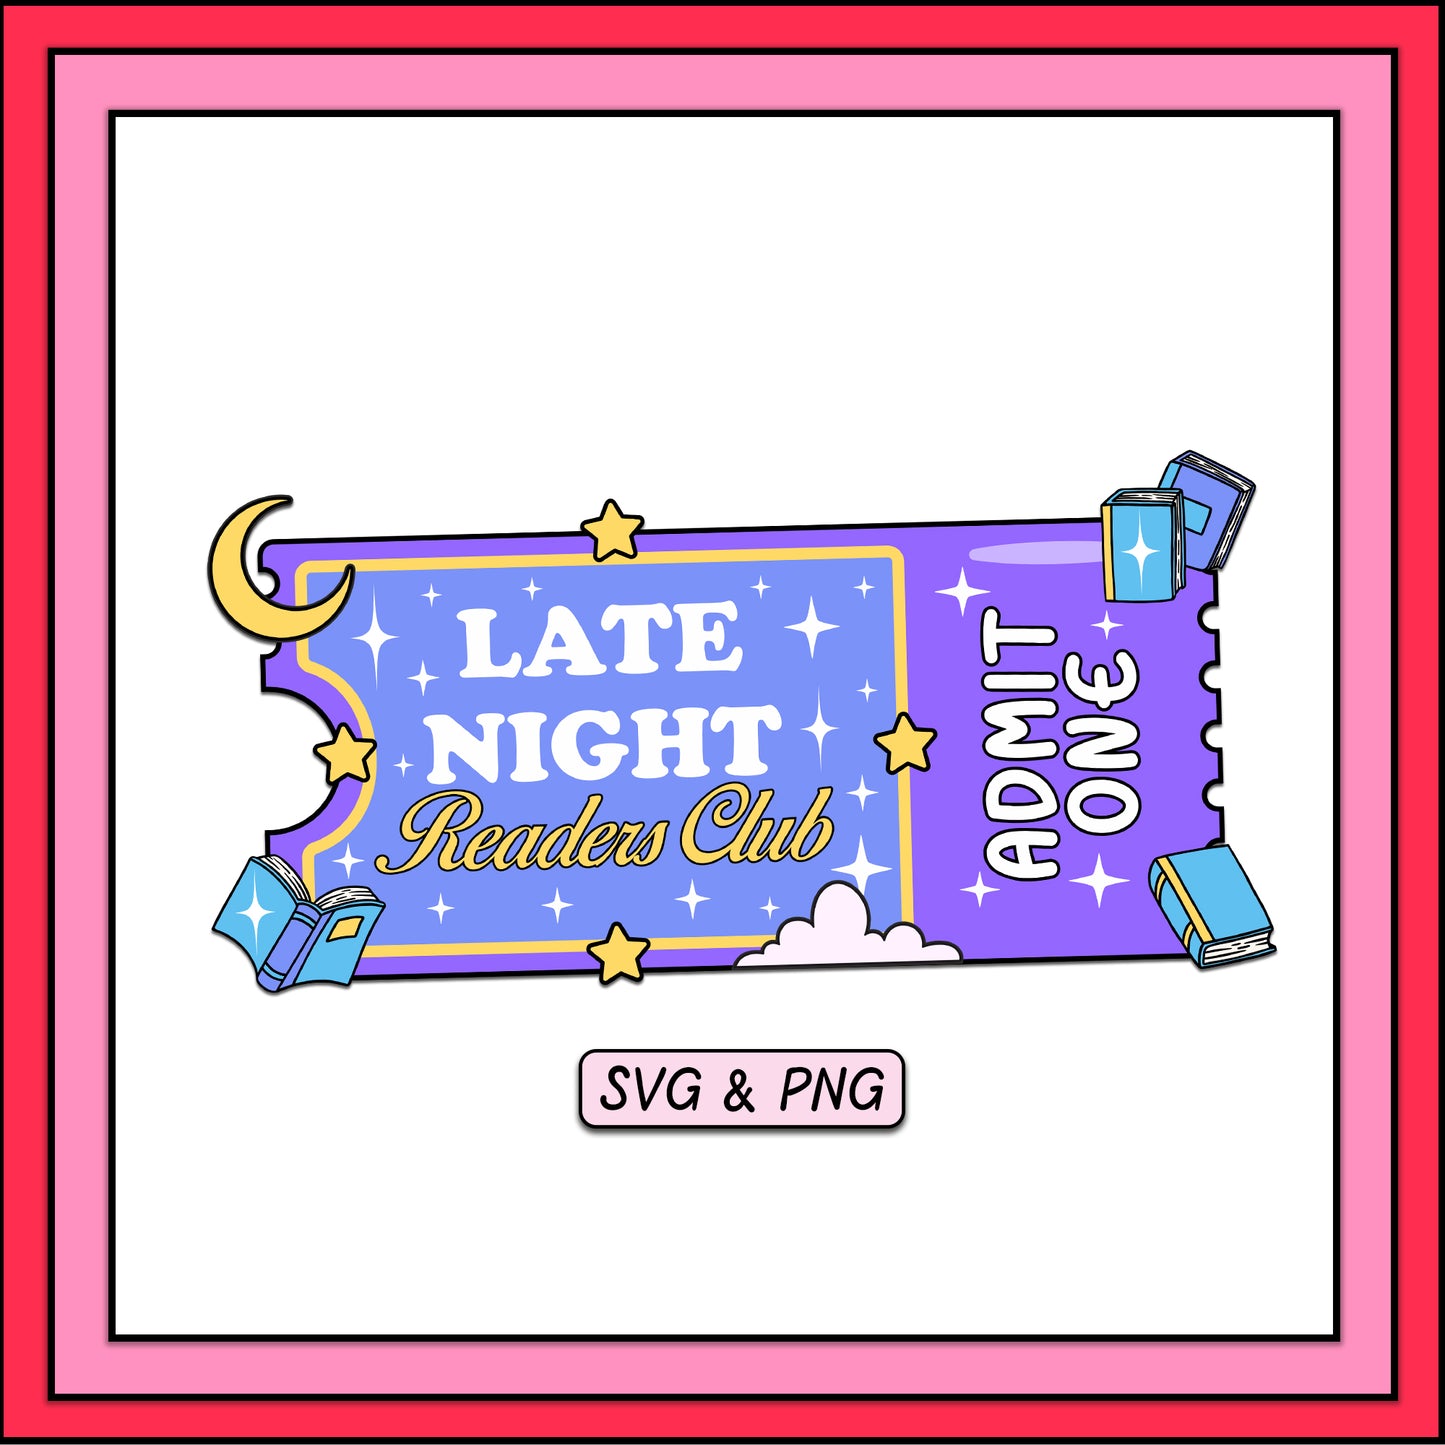 Late Night Readers Club - SVG & PNG Design File